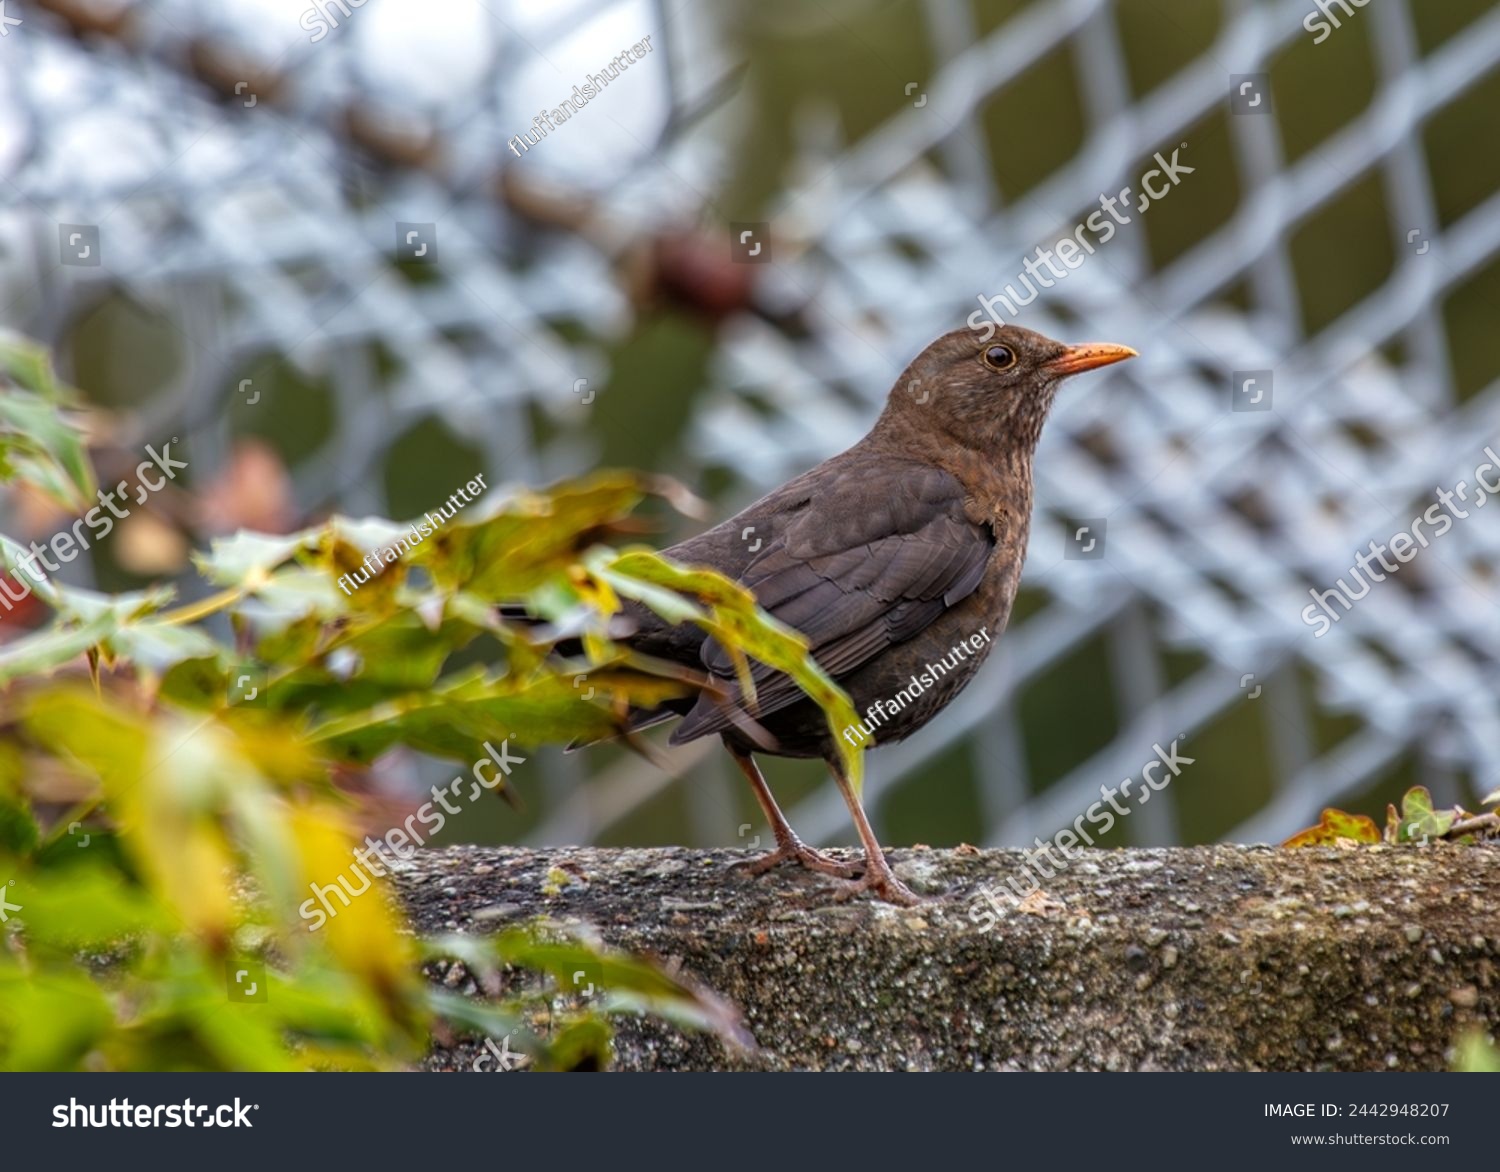 Female Blackbird with dark brown plumage searches for food amongst the trees of St. James's Park, London.  #2442948207